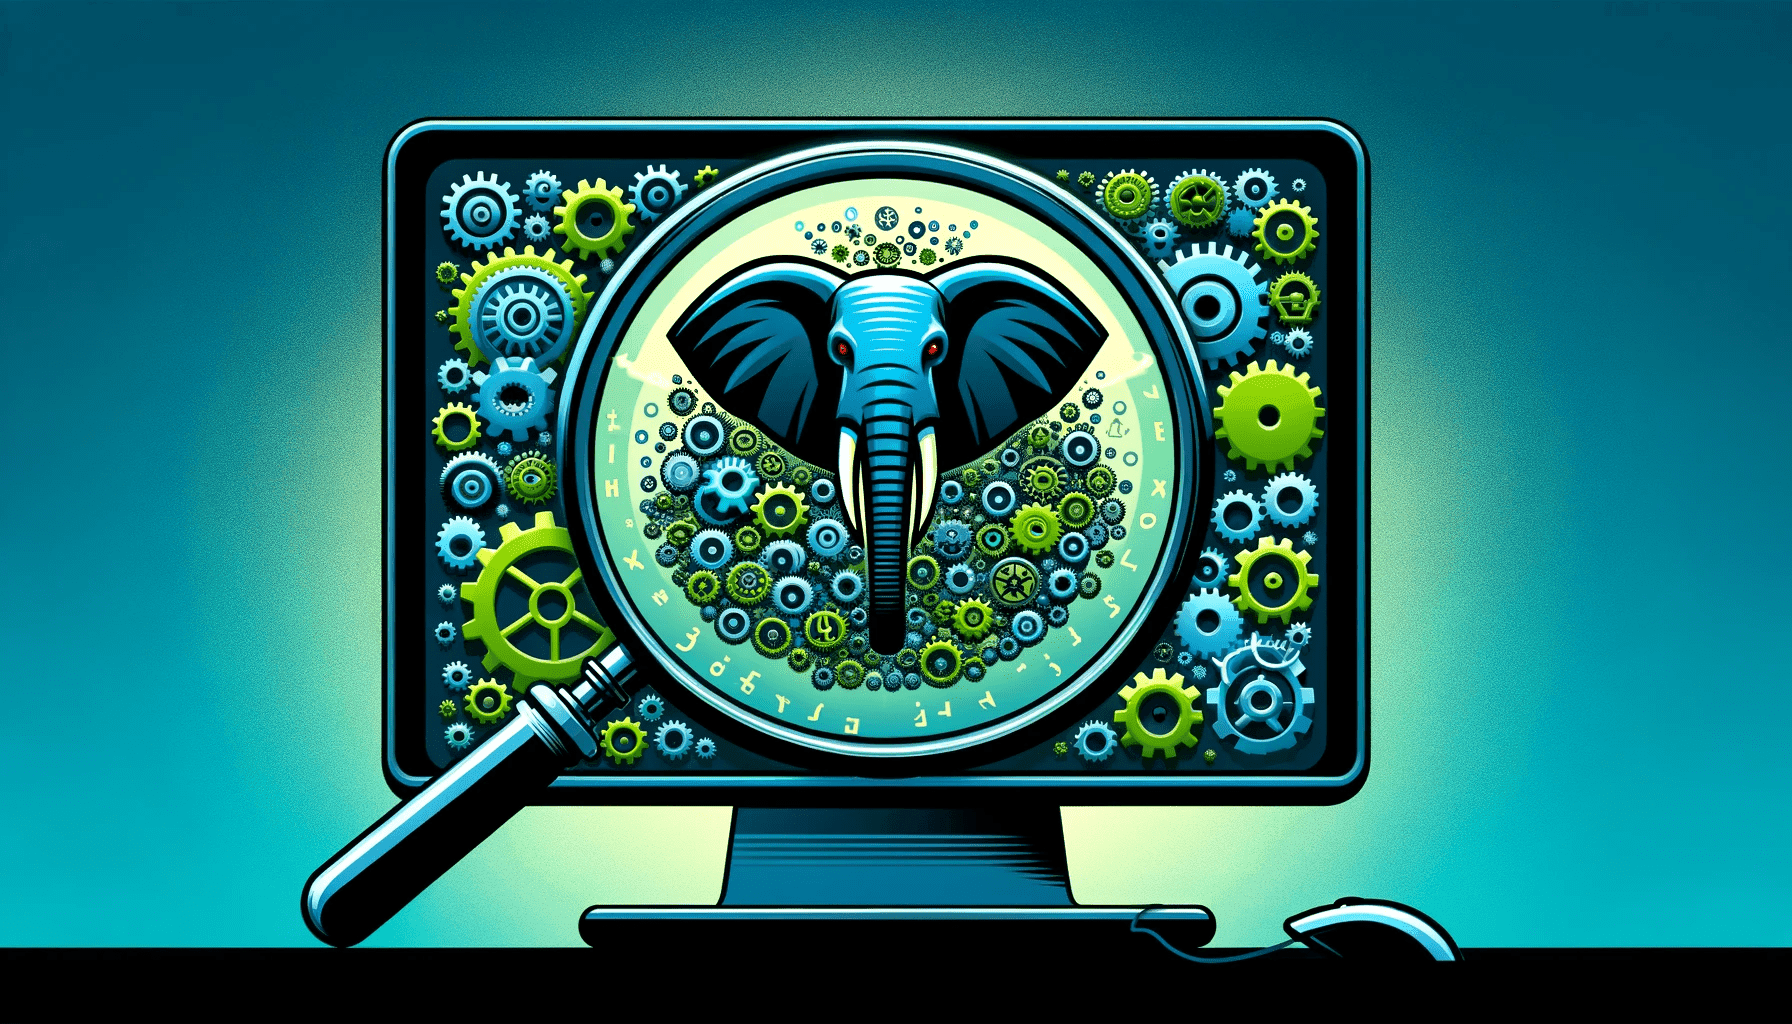 A cartoon computer display showing an elephant and many gears